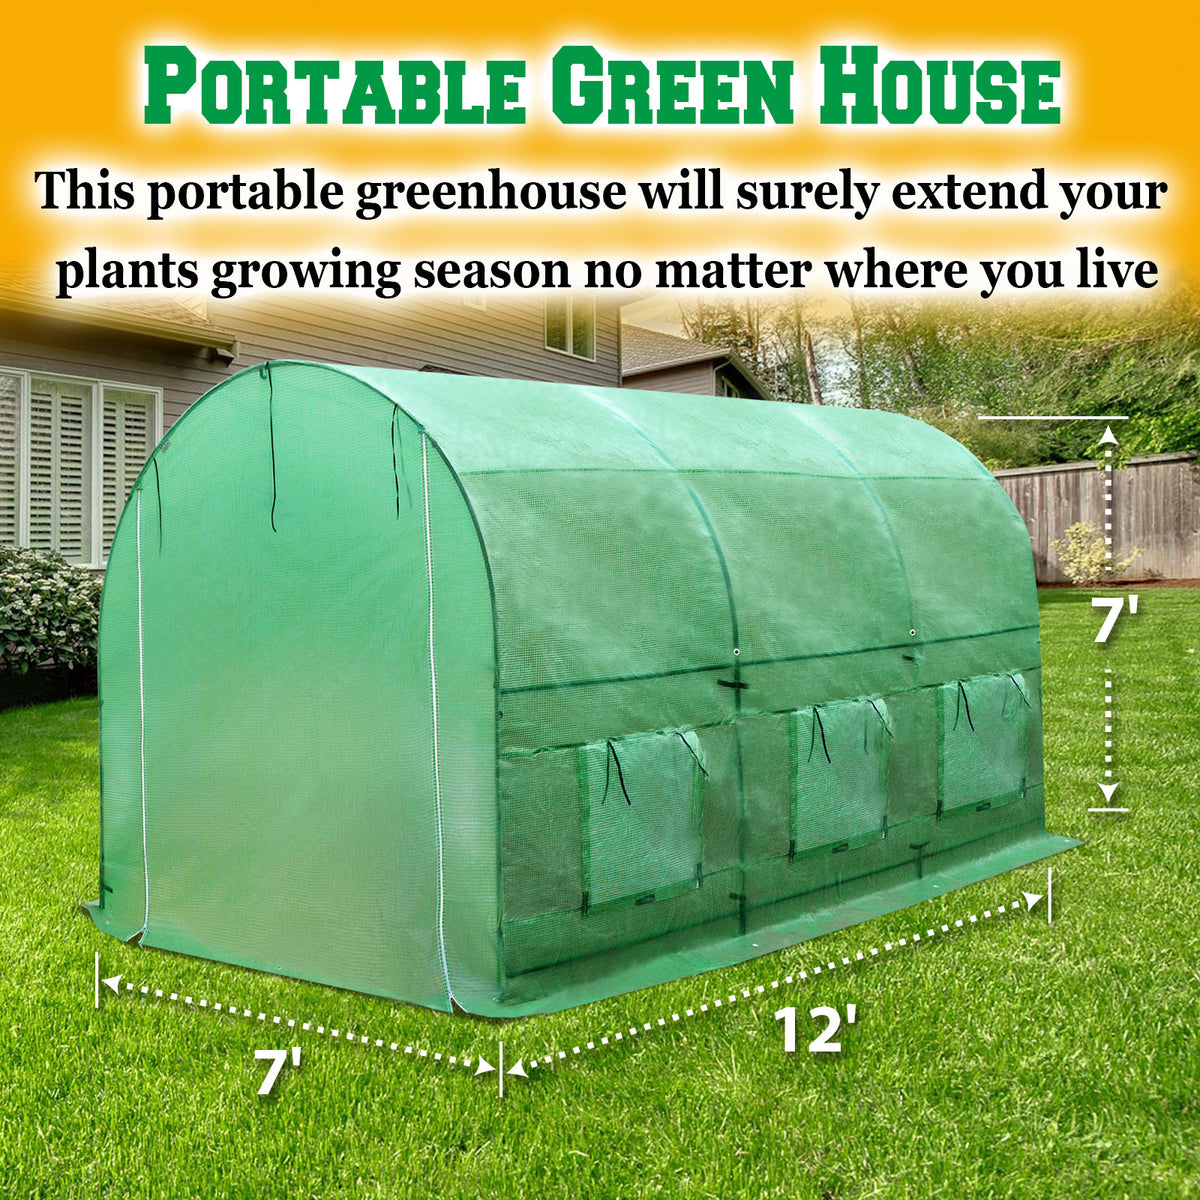 Details about   Portable Steel Green House Larger Walk-In Outdoor Plant Gardening Hot Greenhouse 